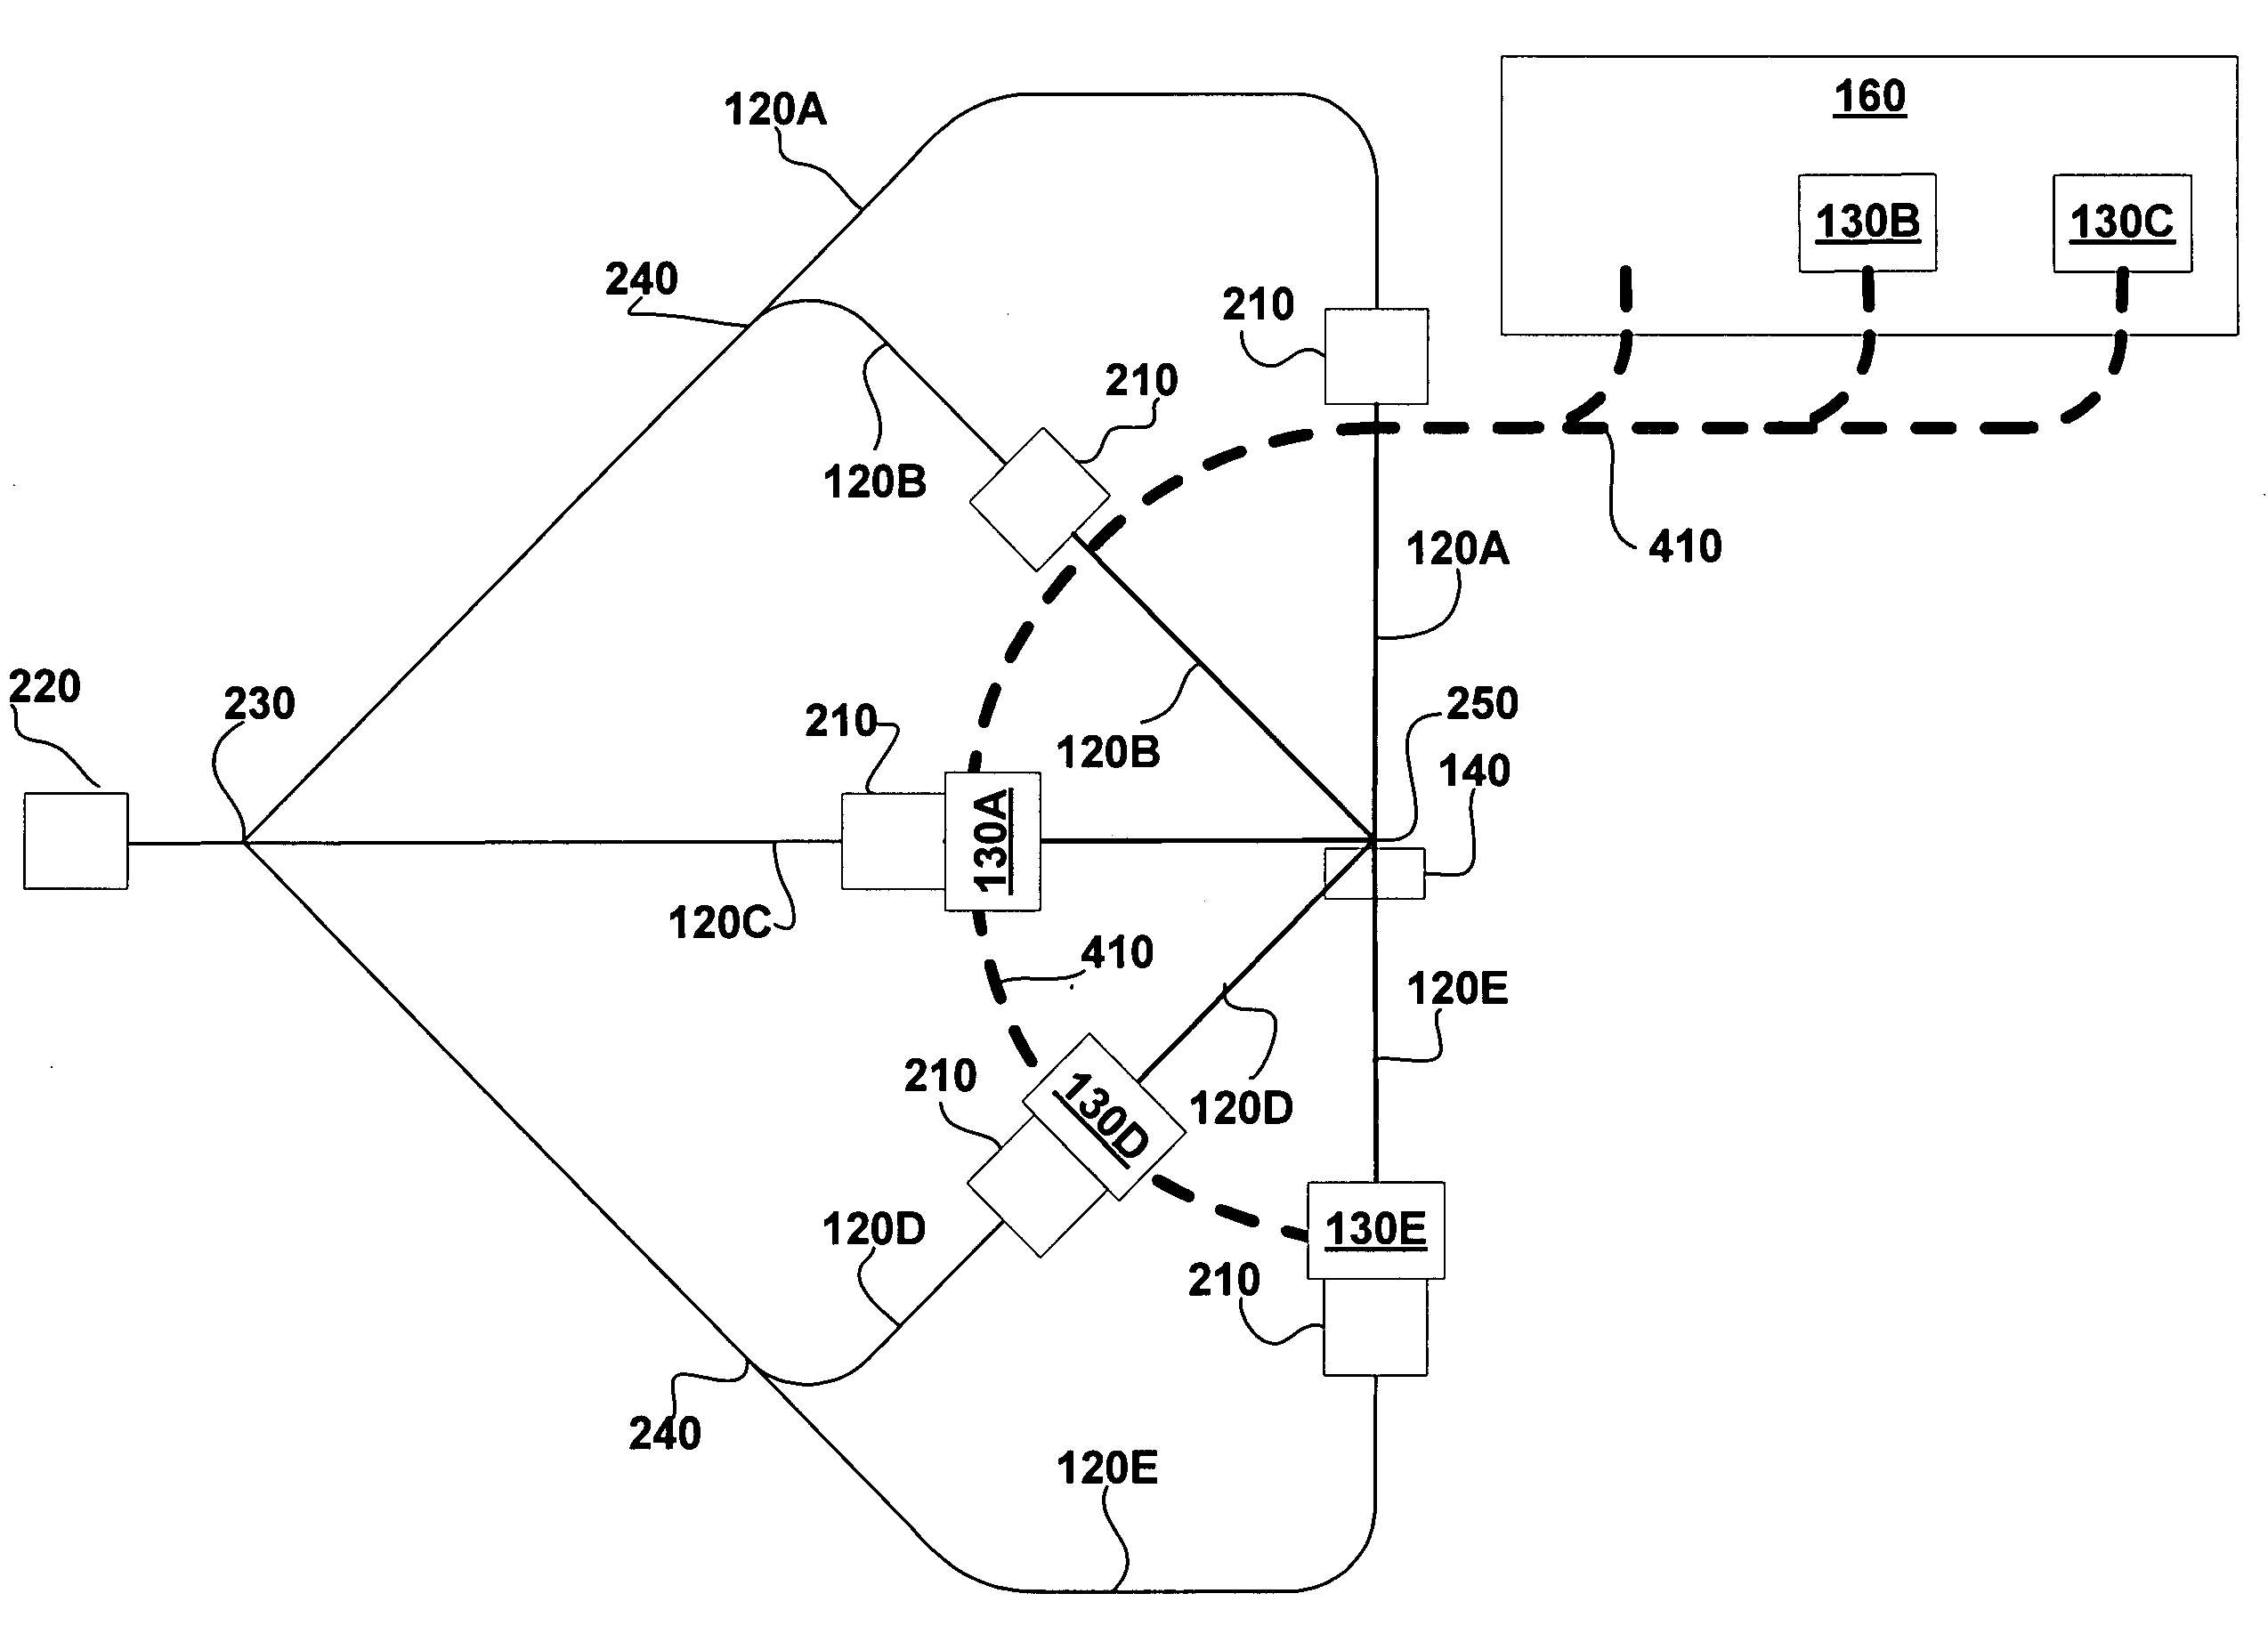 Particle beam system including exchangeable particle beam nozzle